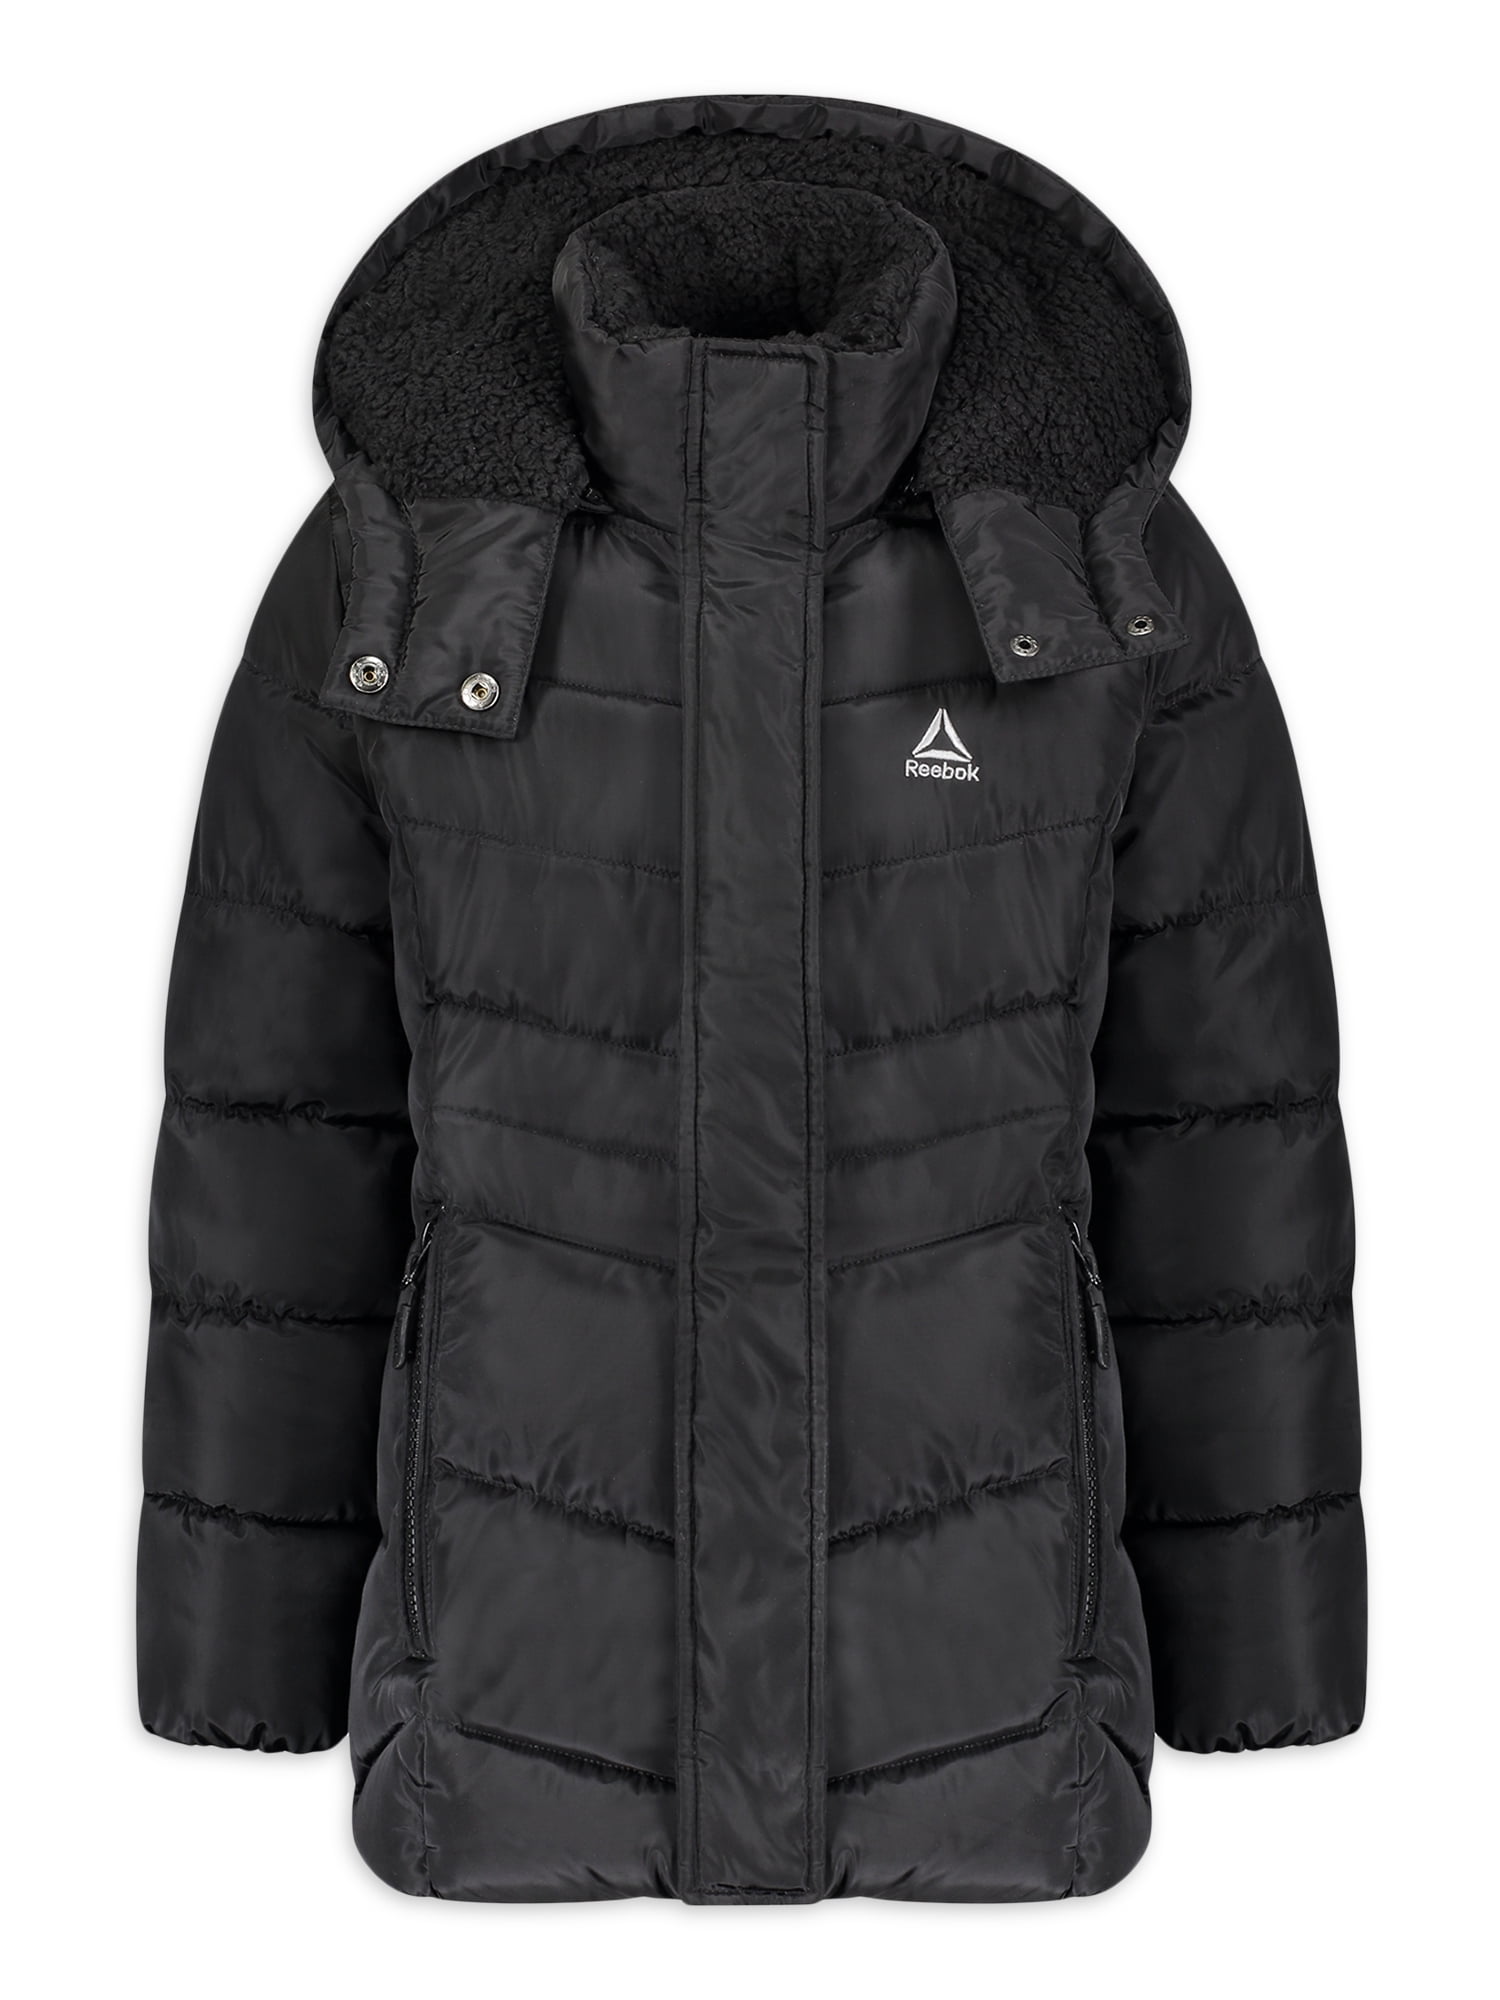 Reebok girls Active Outerwear Jacket More Styles Available